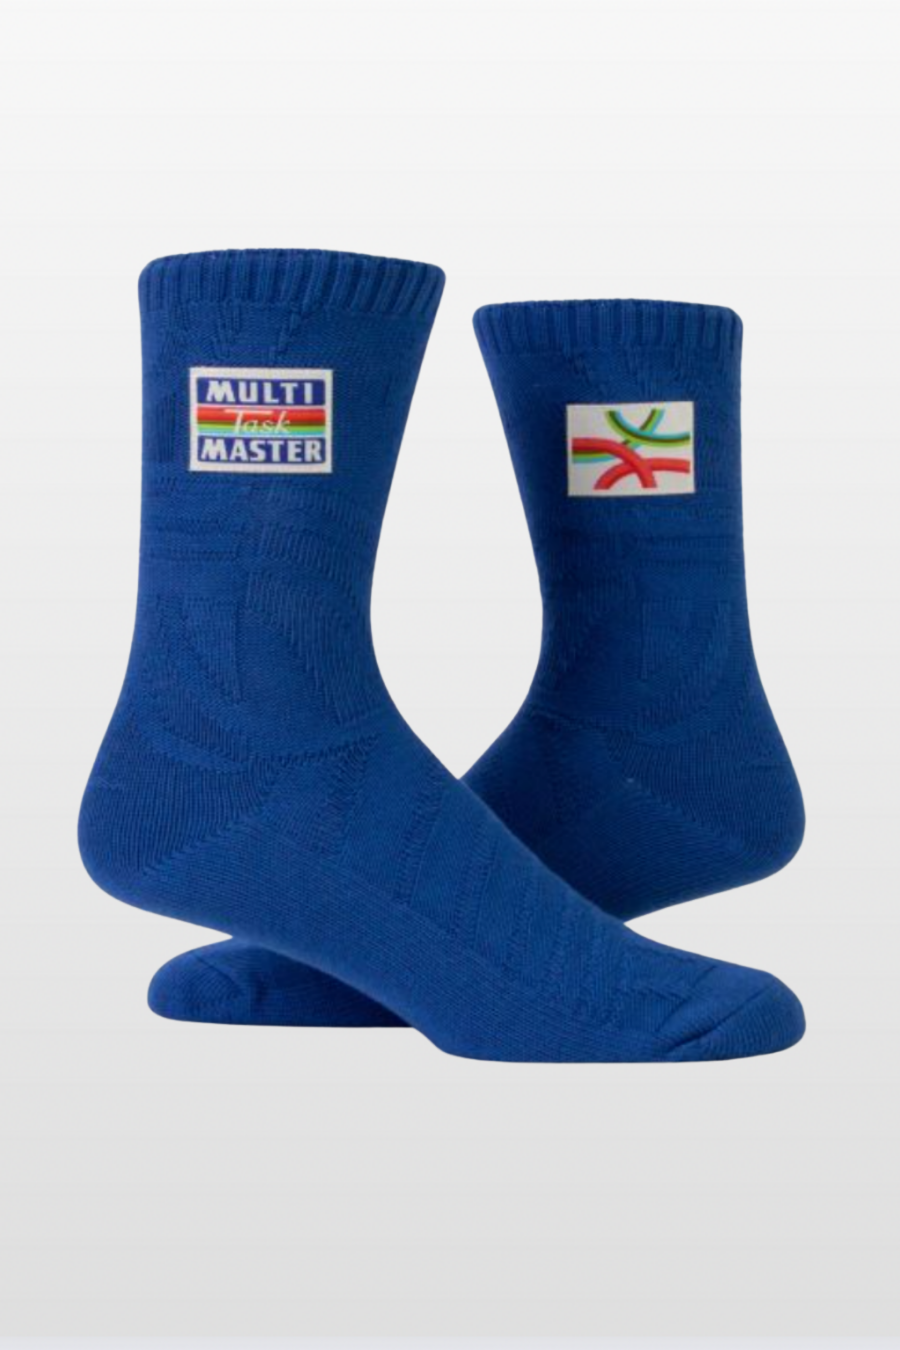 Cotton Crew "Tag" Socks from Blue Q